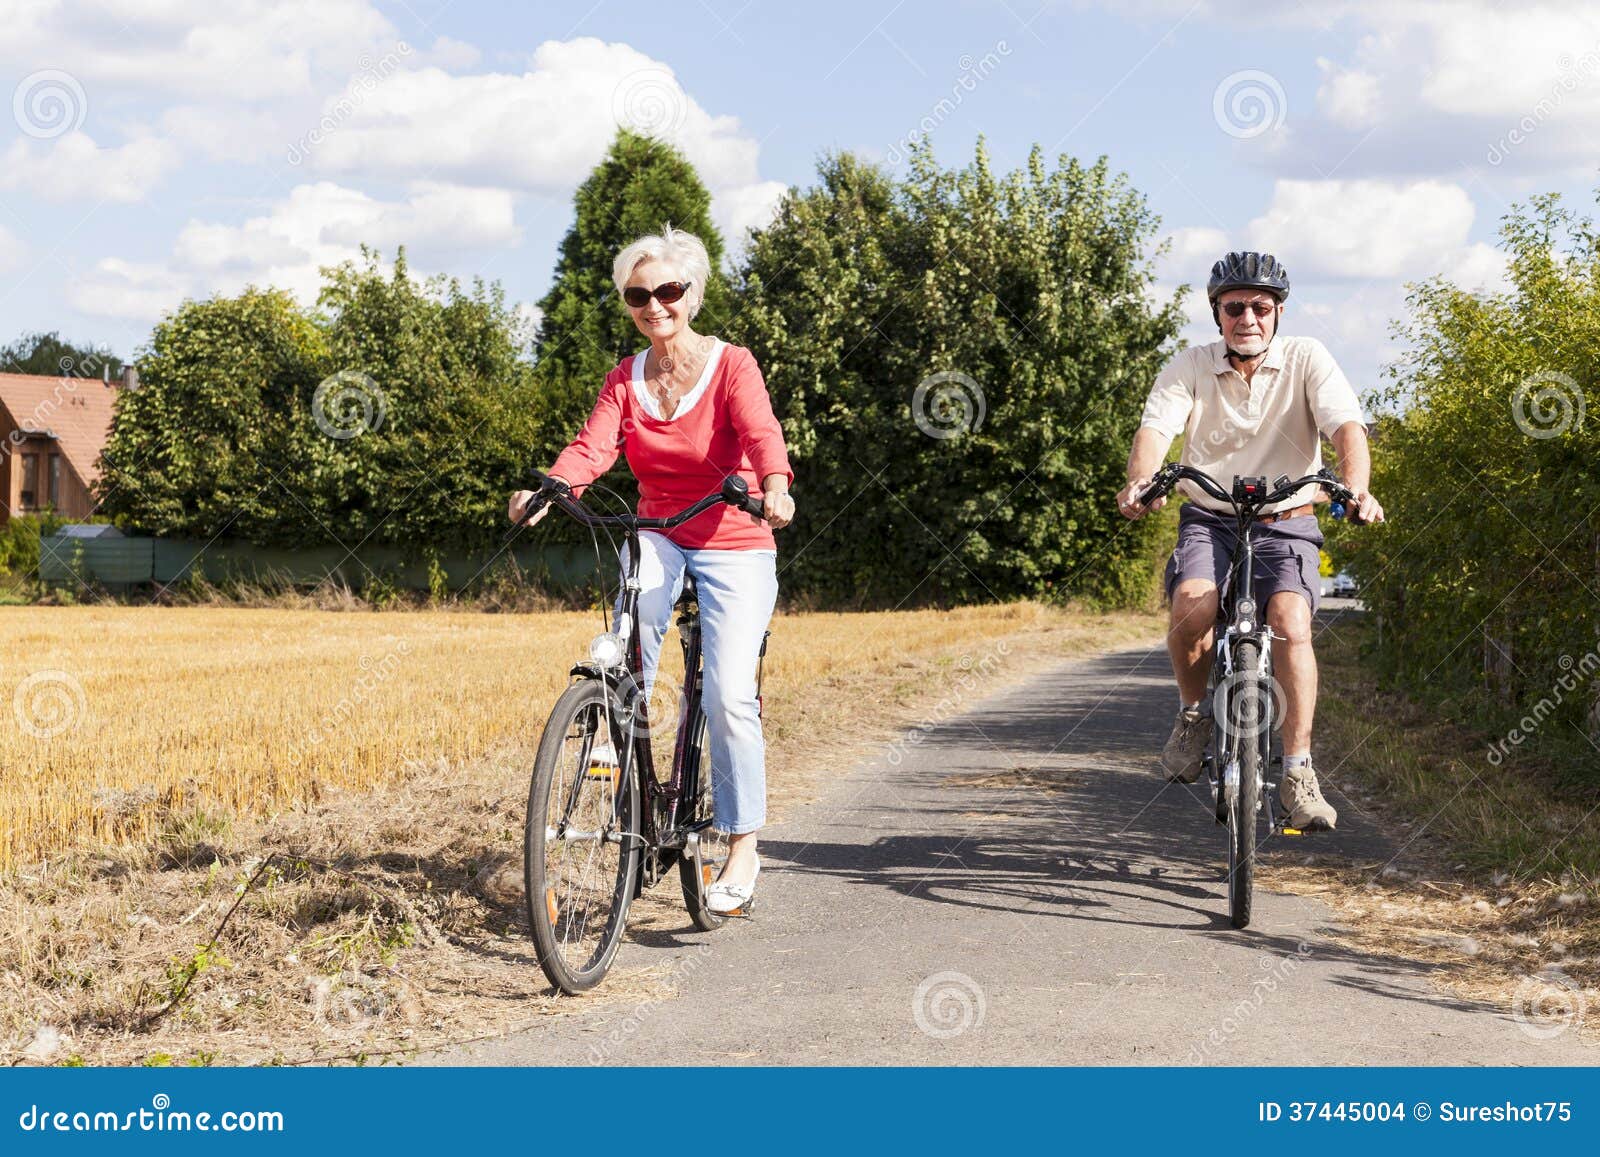 bicycle trips for seniors